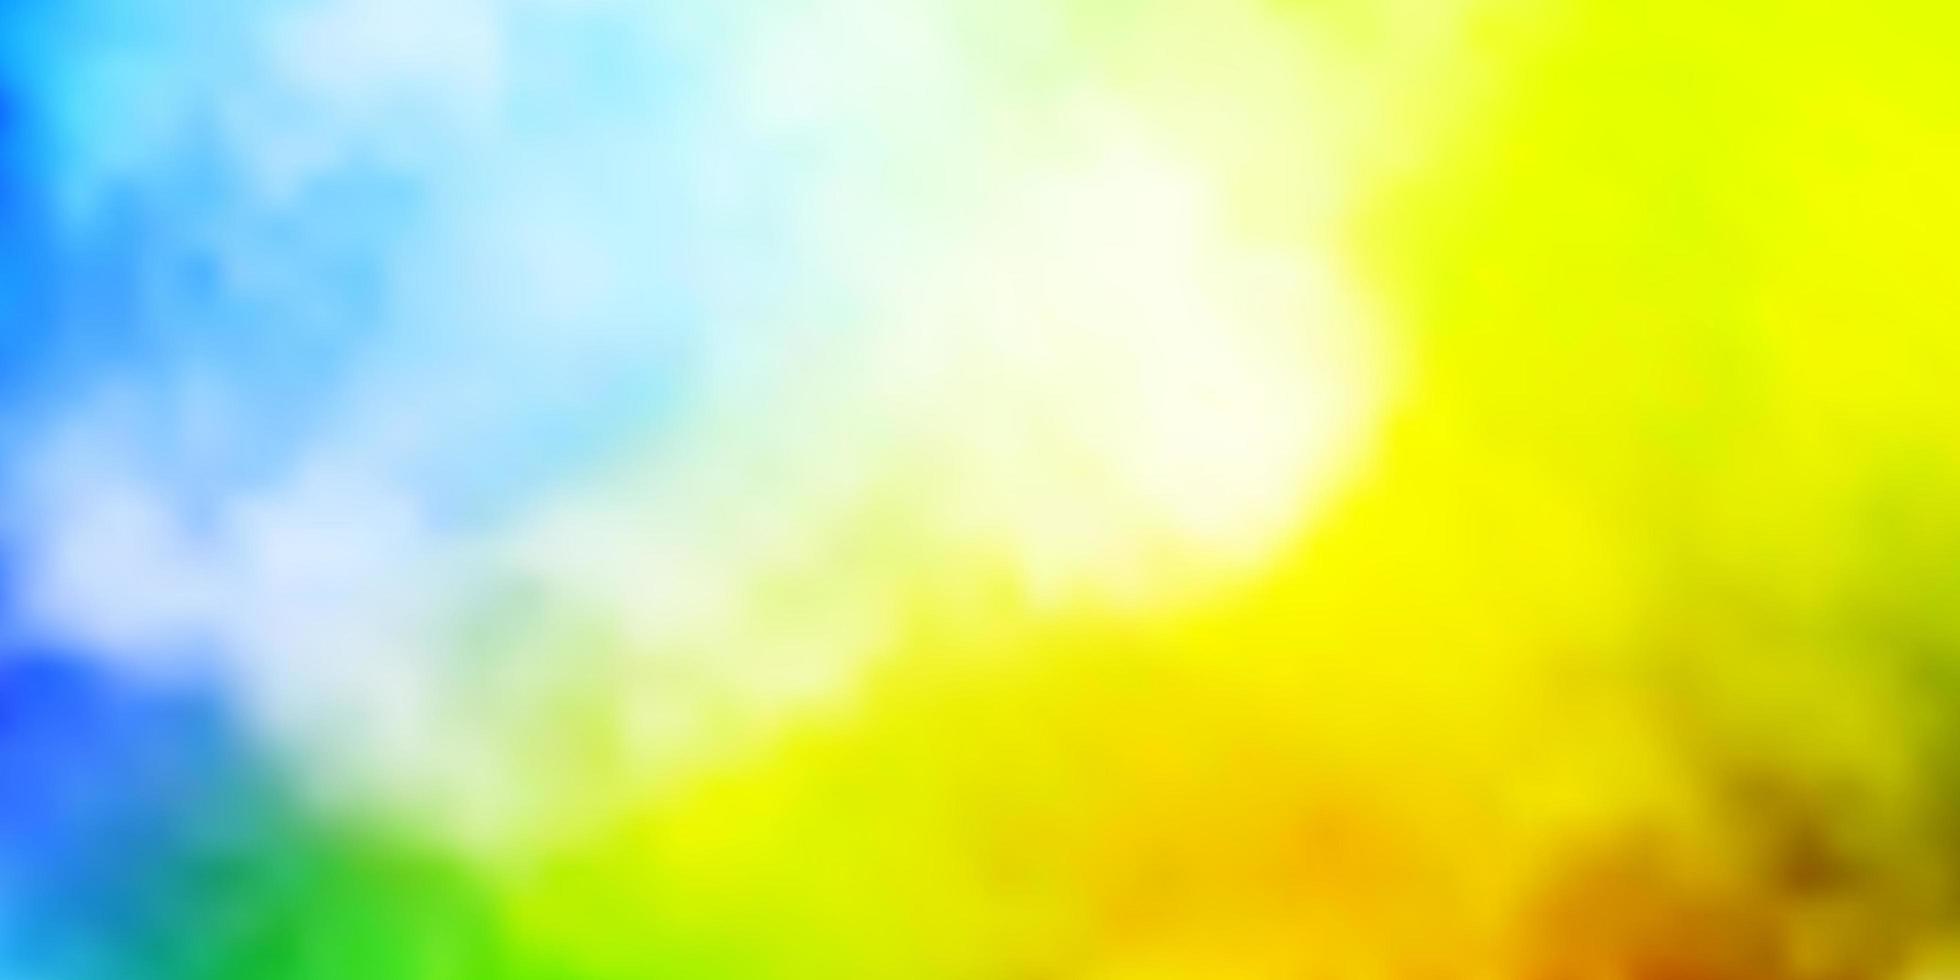 Free Photo  Vivid blurred colorful wallpaper background